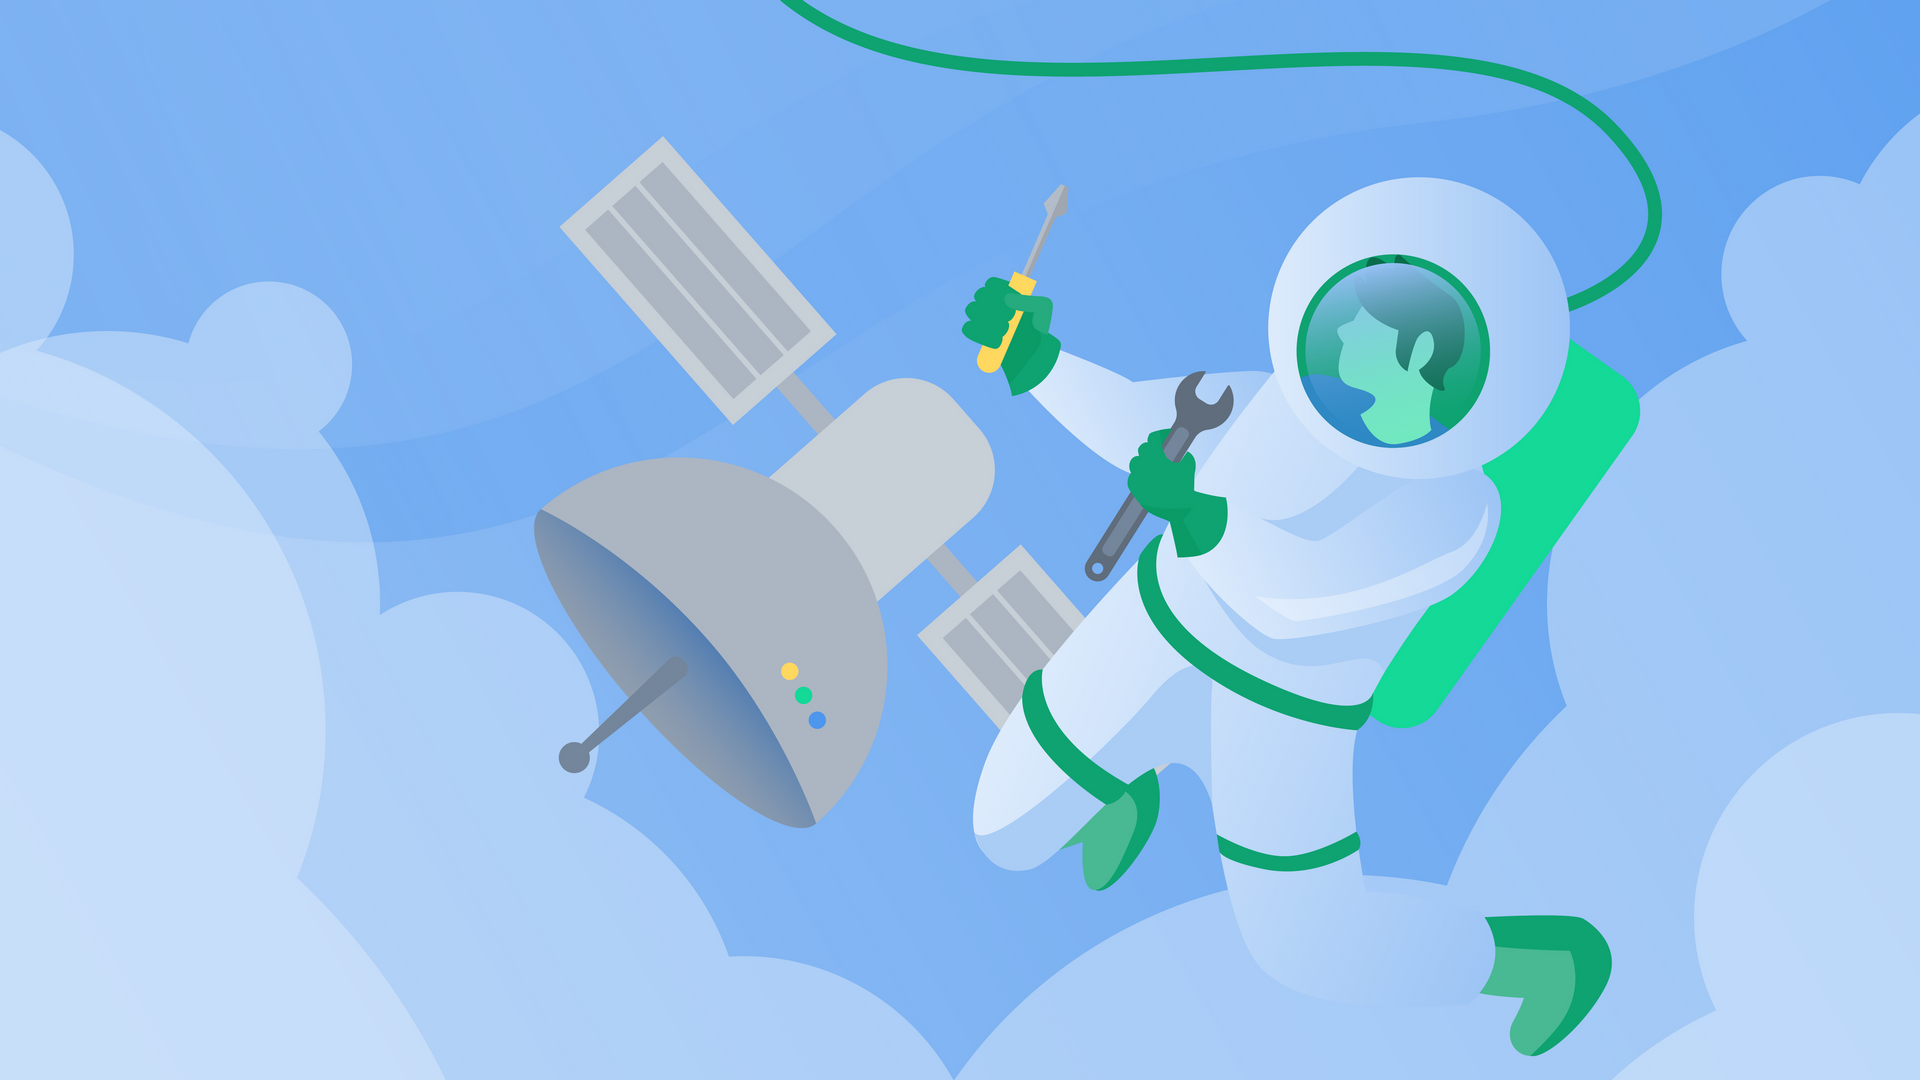 Astro is a terrific open-source web framework for content-heavy websites like landing pages, blogs, and more. Let's take a tour of Astro and its features.